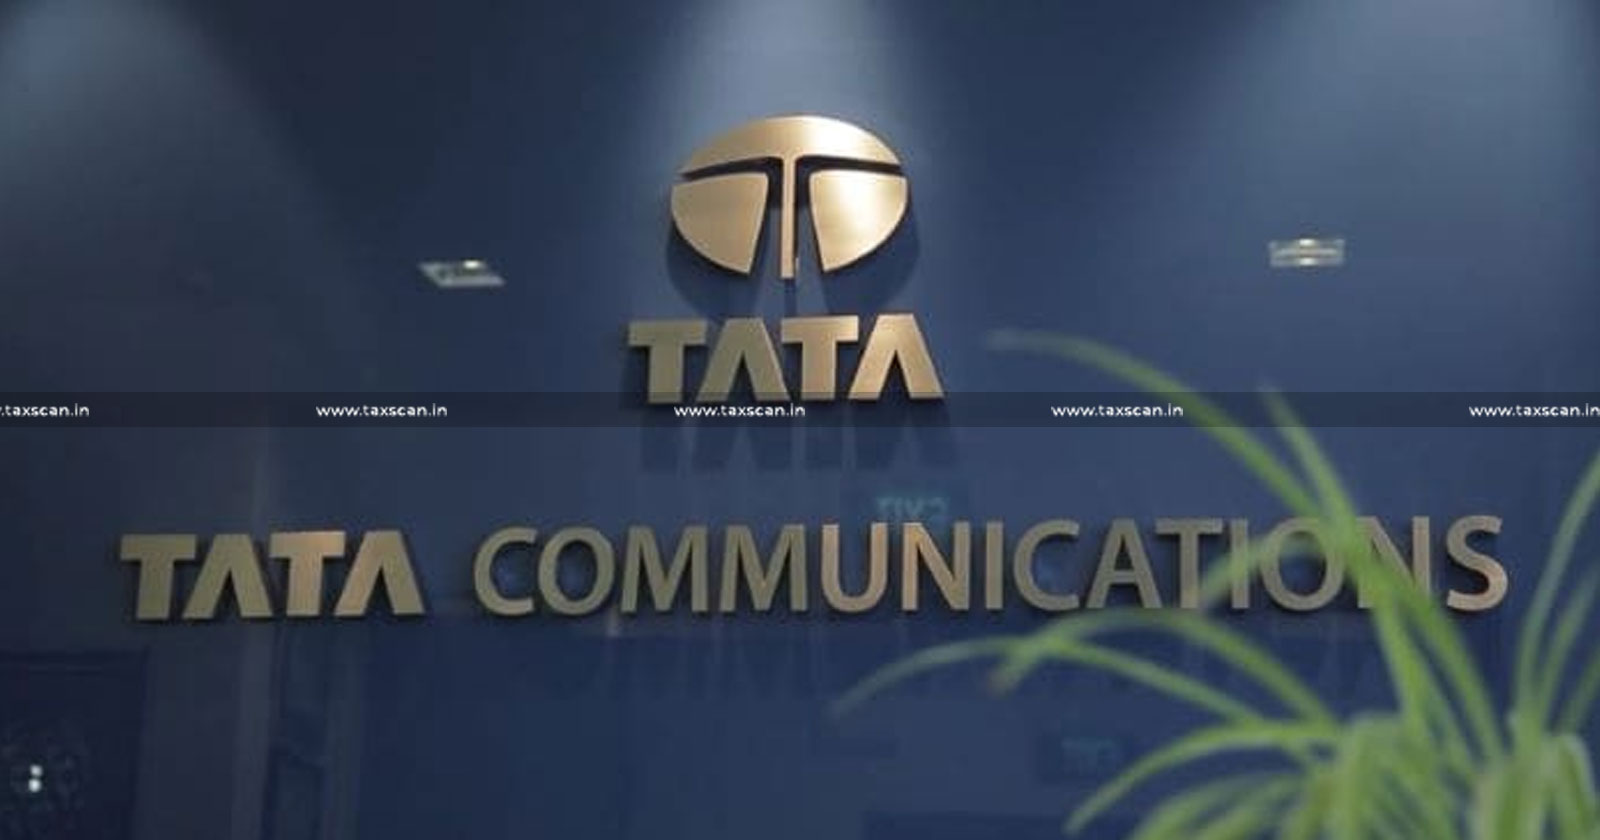 TATA Communications approaches Appellate Tribunal - TDS Order by Income Tax Department - TAXSCAN